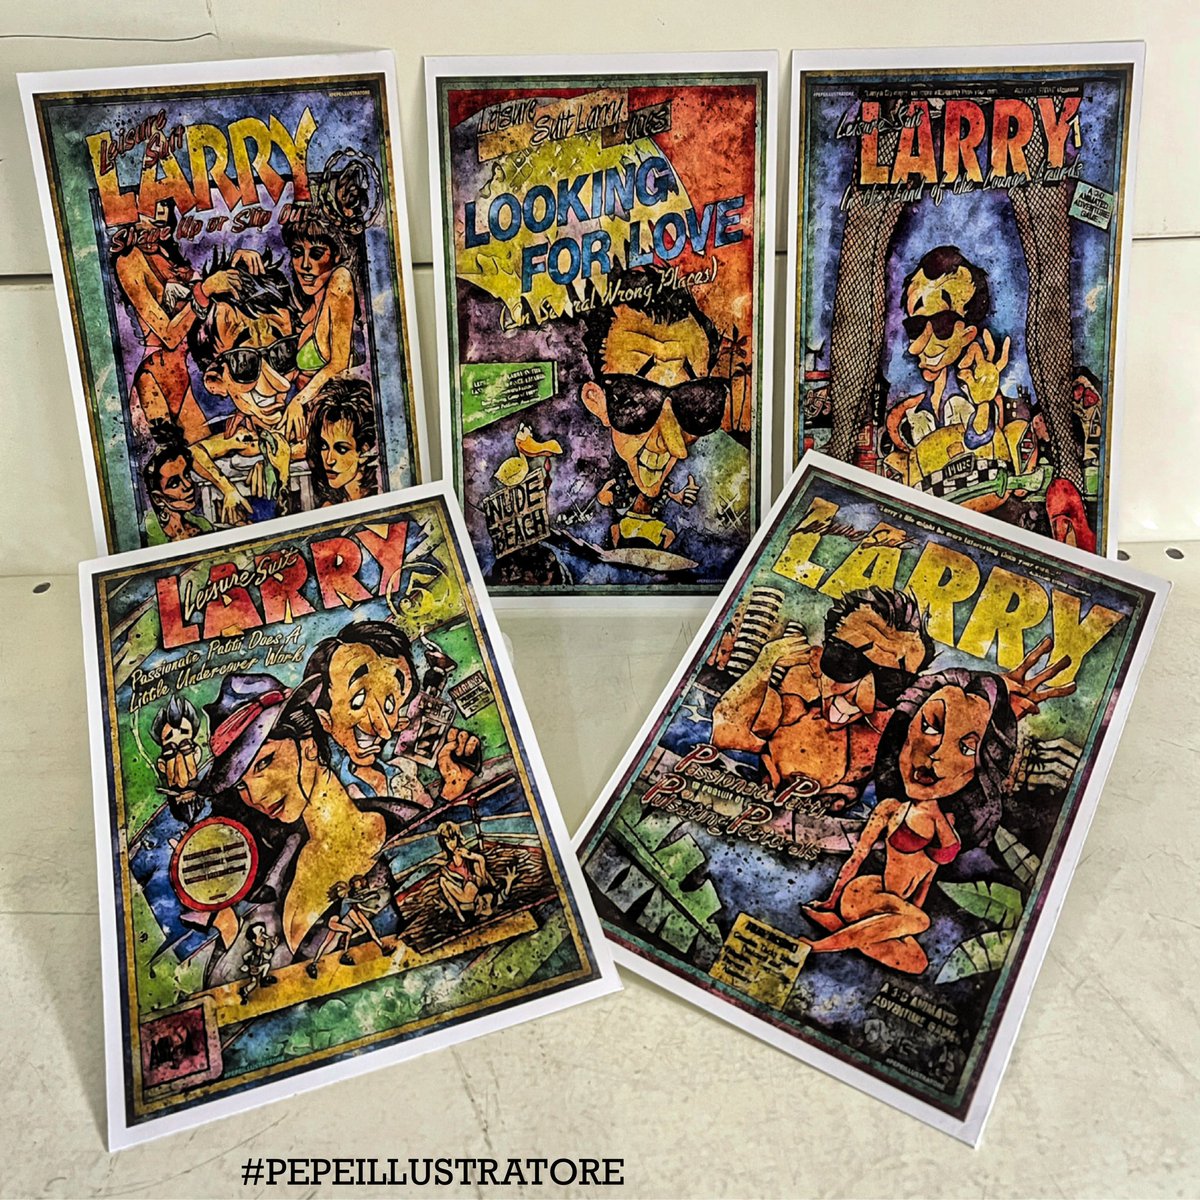 Poster illustration 🎨Watercolors 
Larry Laffer 😎collection ❤️
#leisuresuit #leisuresuitlarry #leisuresuitlarrywetdreamsdry #larry #larrylaffer  #poster #watercolor #popart  #pc #pcgaming  #gamer #instagamer #videogames #videogame #instagaming #pointandclickadventure #adventure